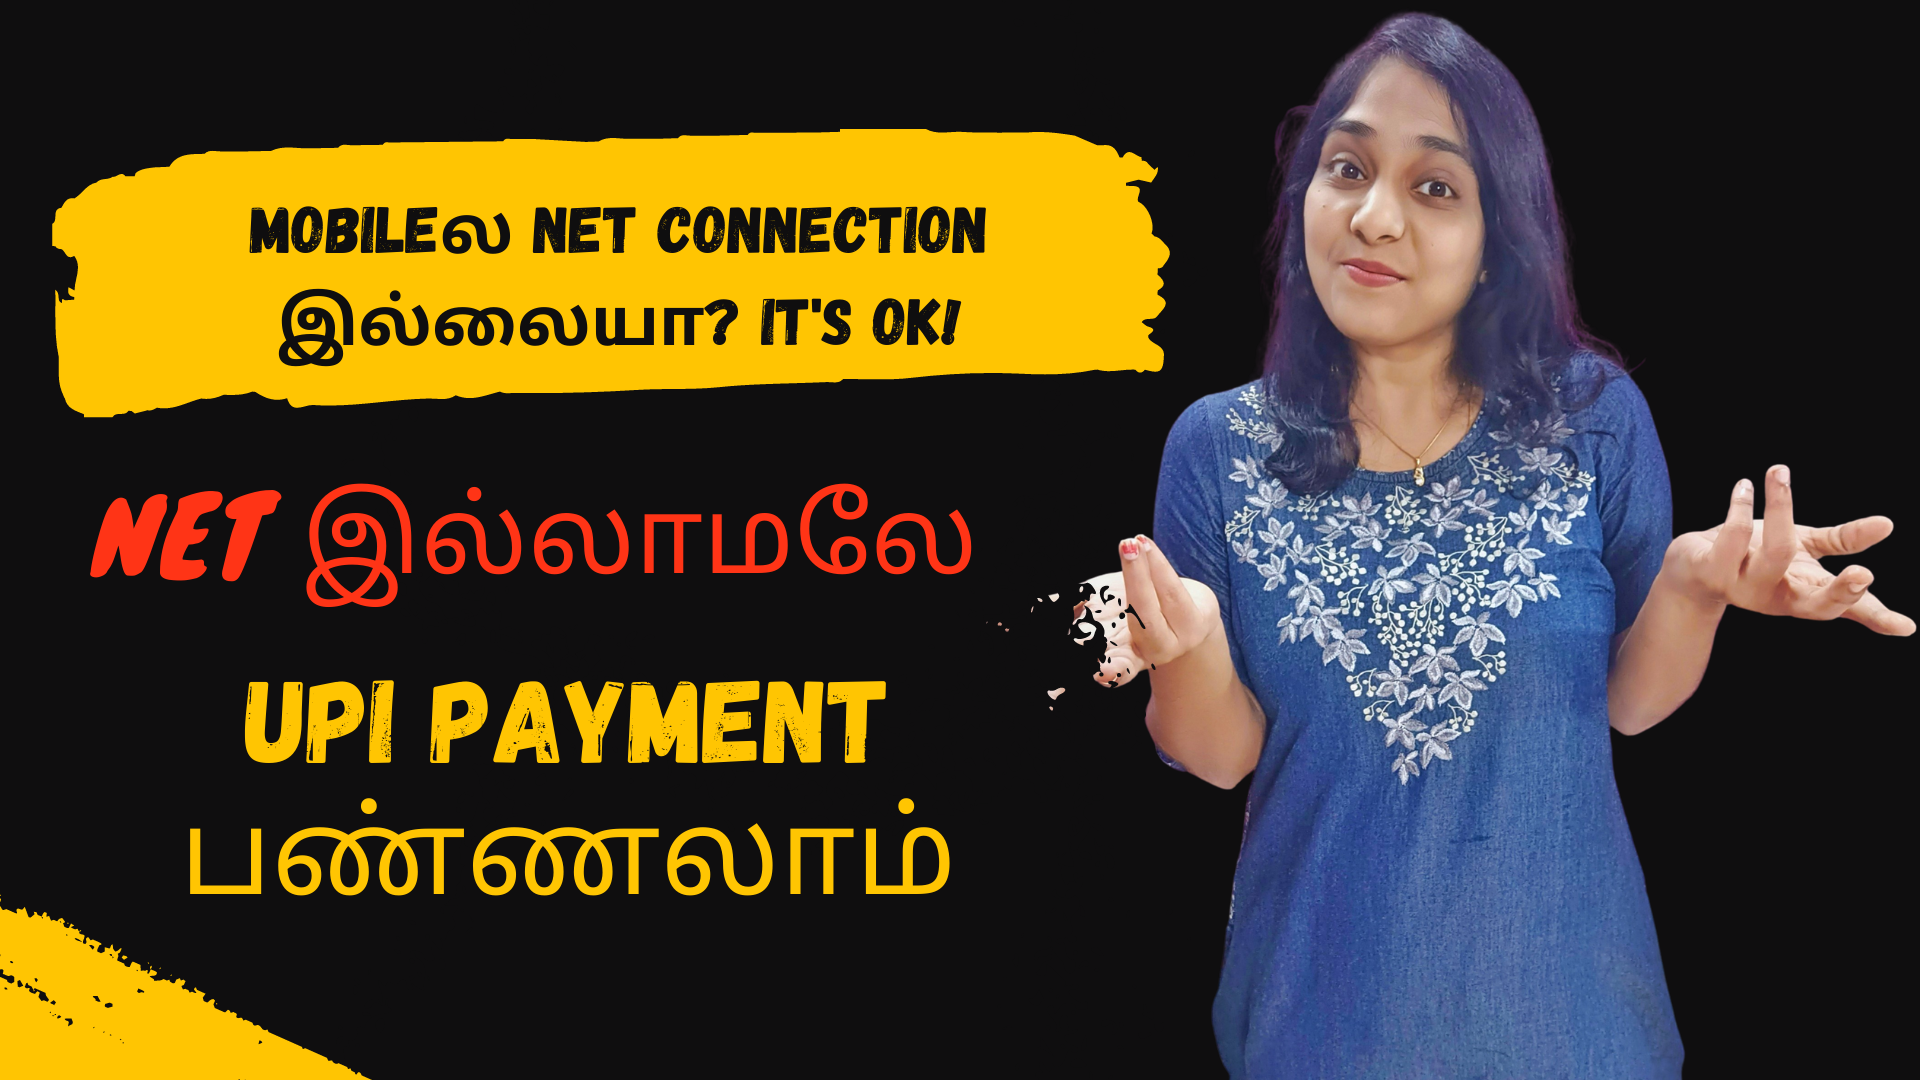 How To Send UPI Payment Without Internet Connection? USSD Code Number And Procedure